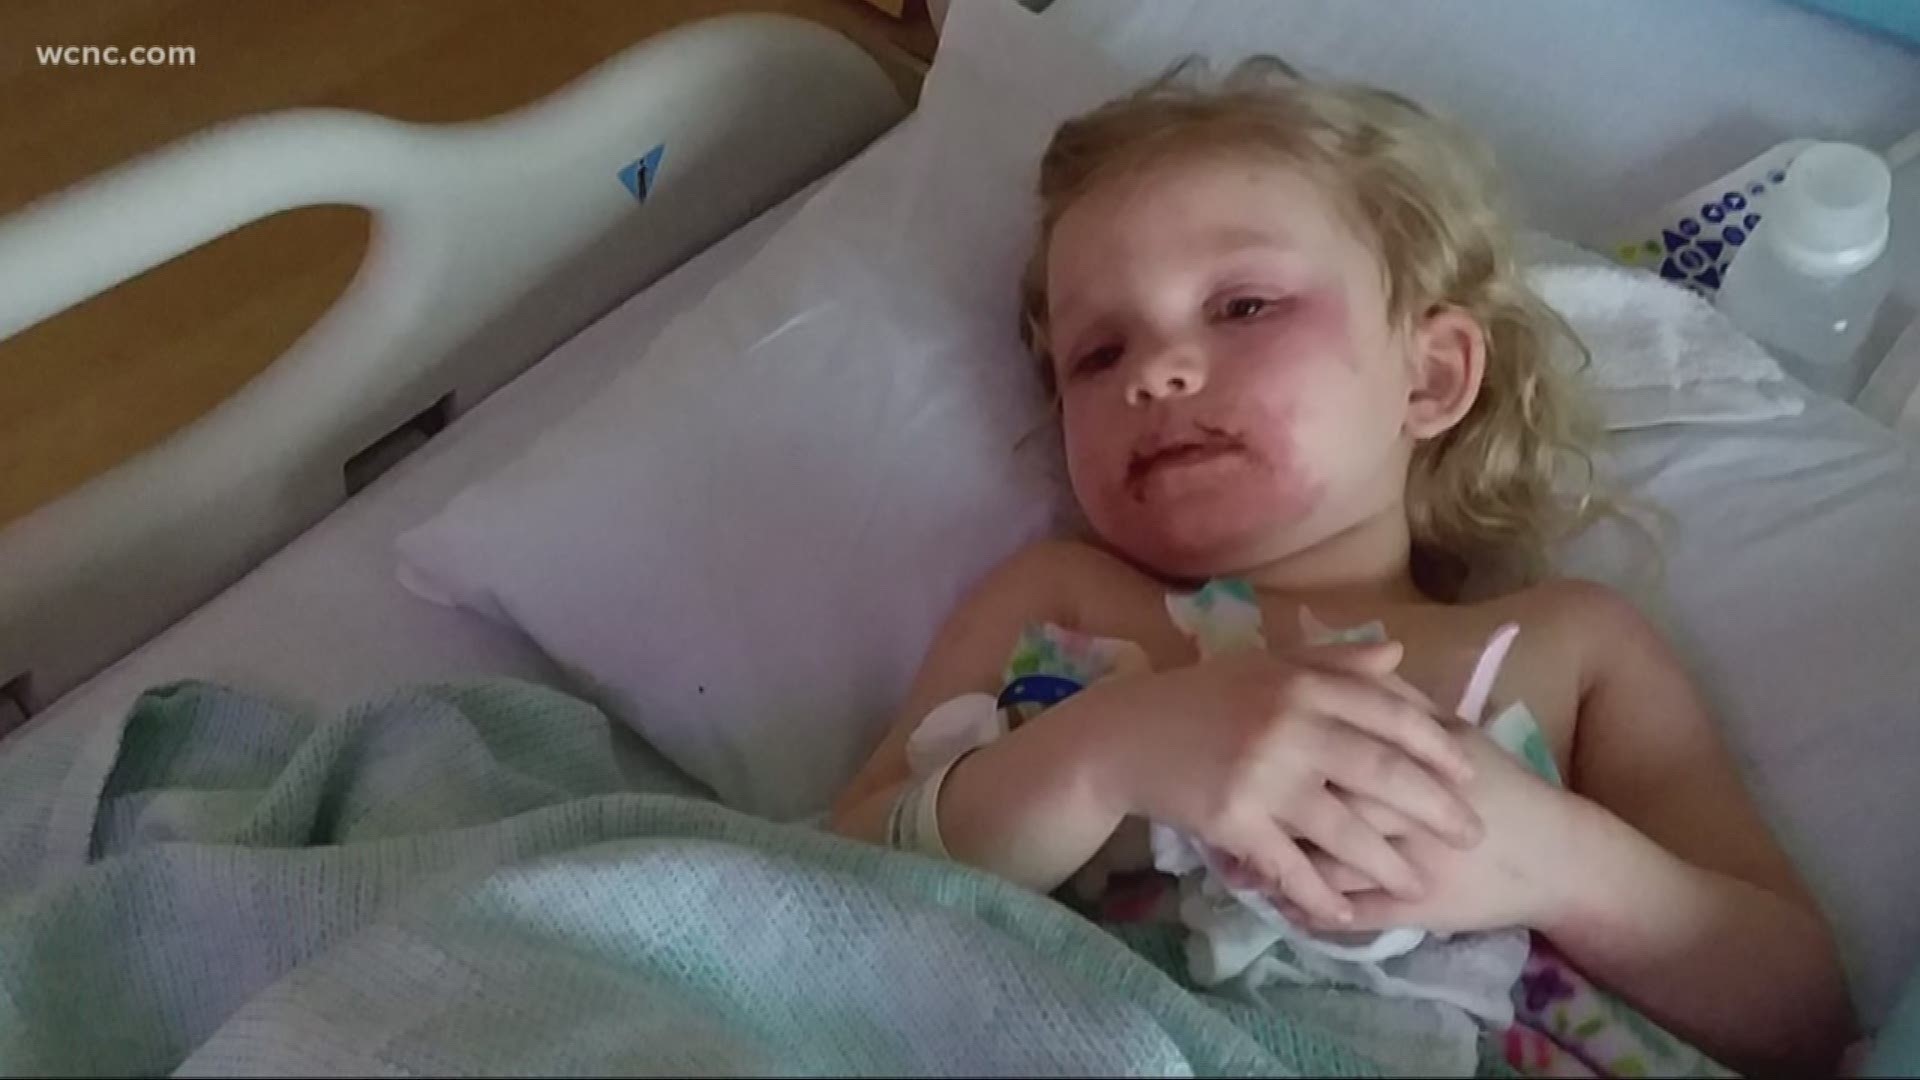 A family says their 3-year-old daughter suffered a severe allergic reaction to a child's makeup kit.